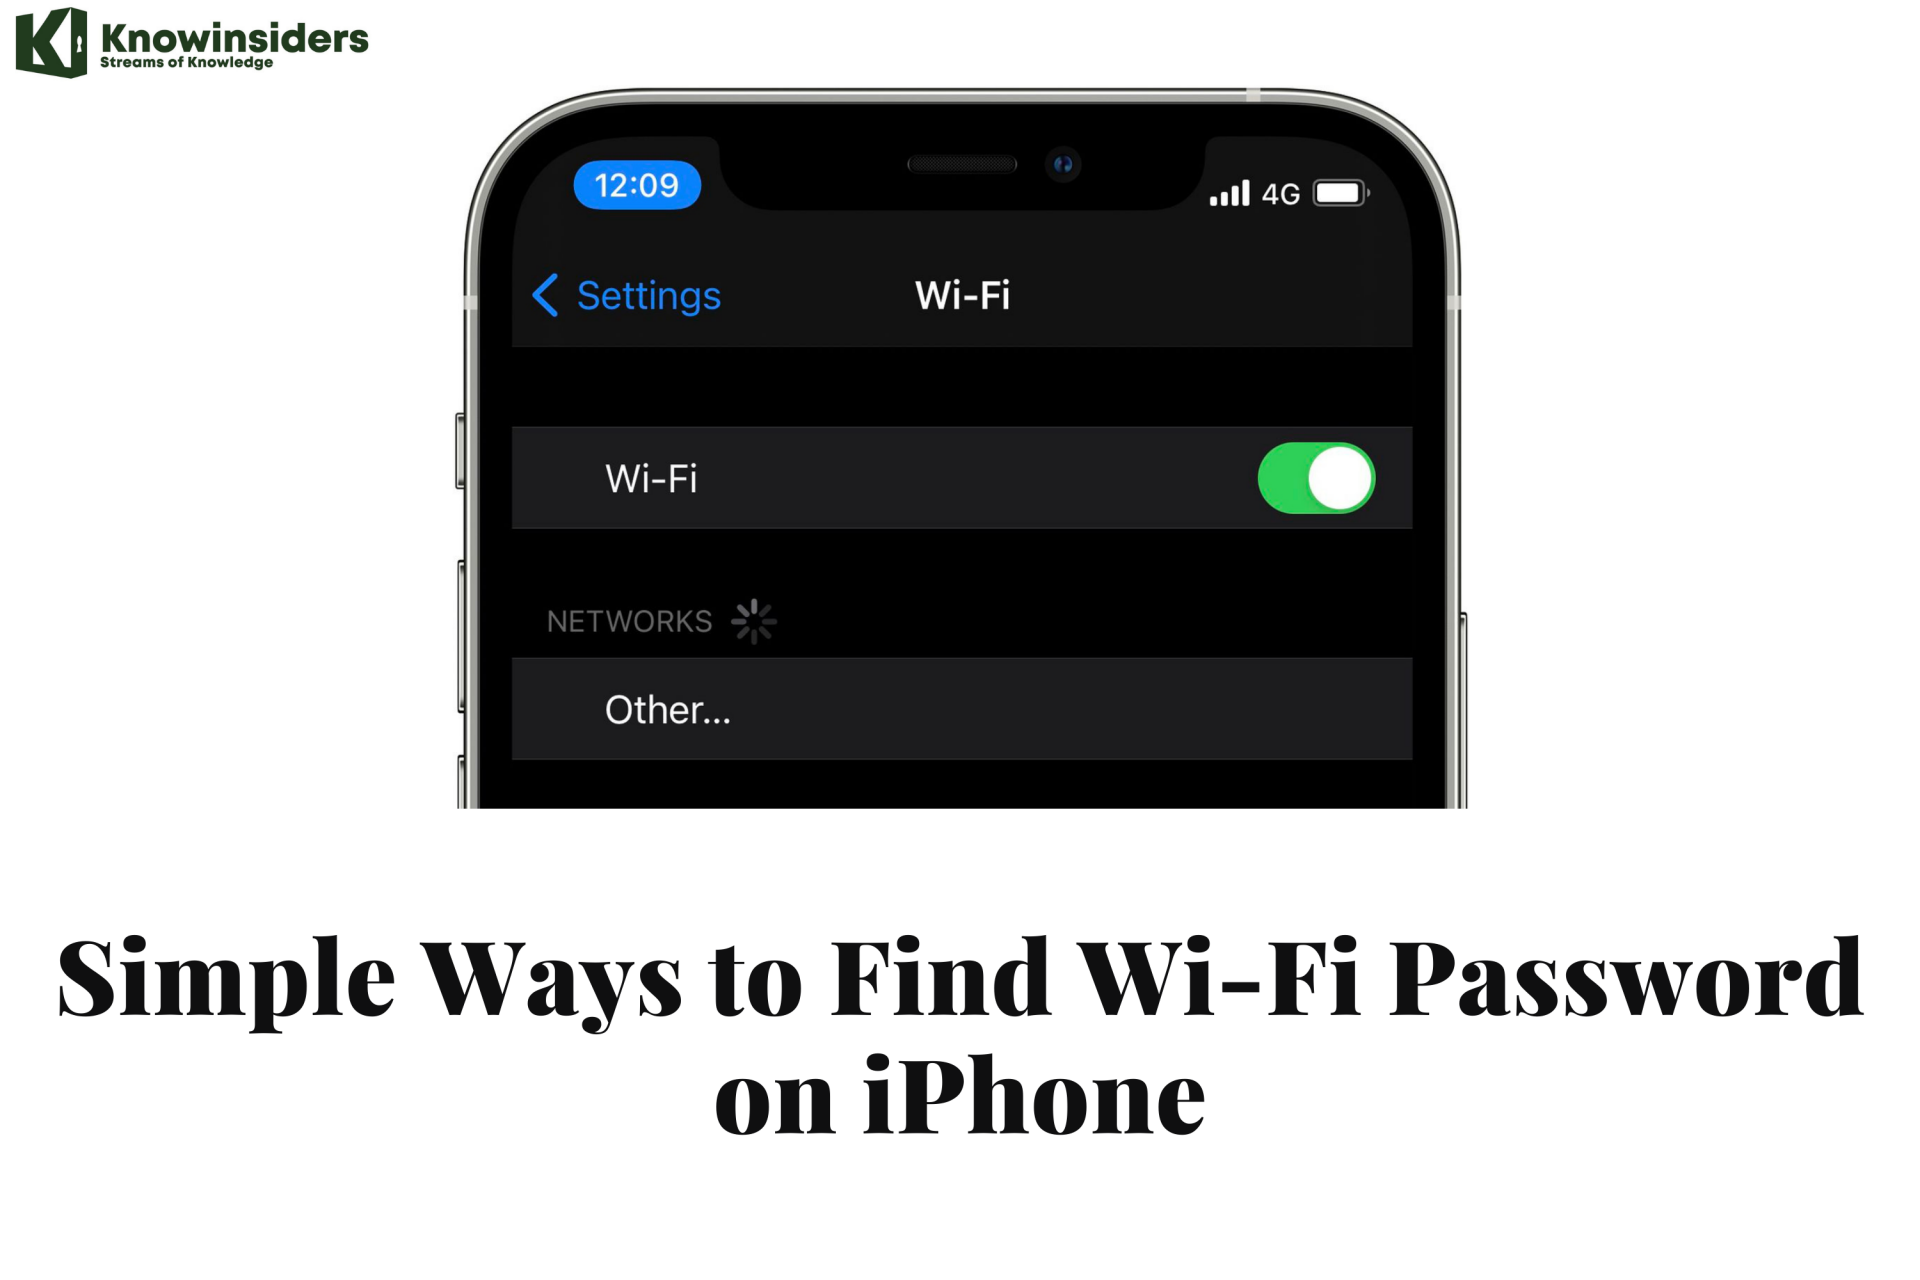 Simple Ways to Find Wi-Fi Password on iPhone | A Complete Guide - Step by Step